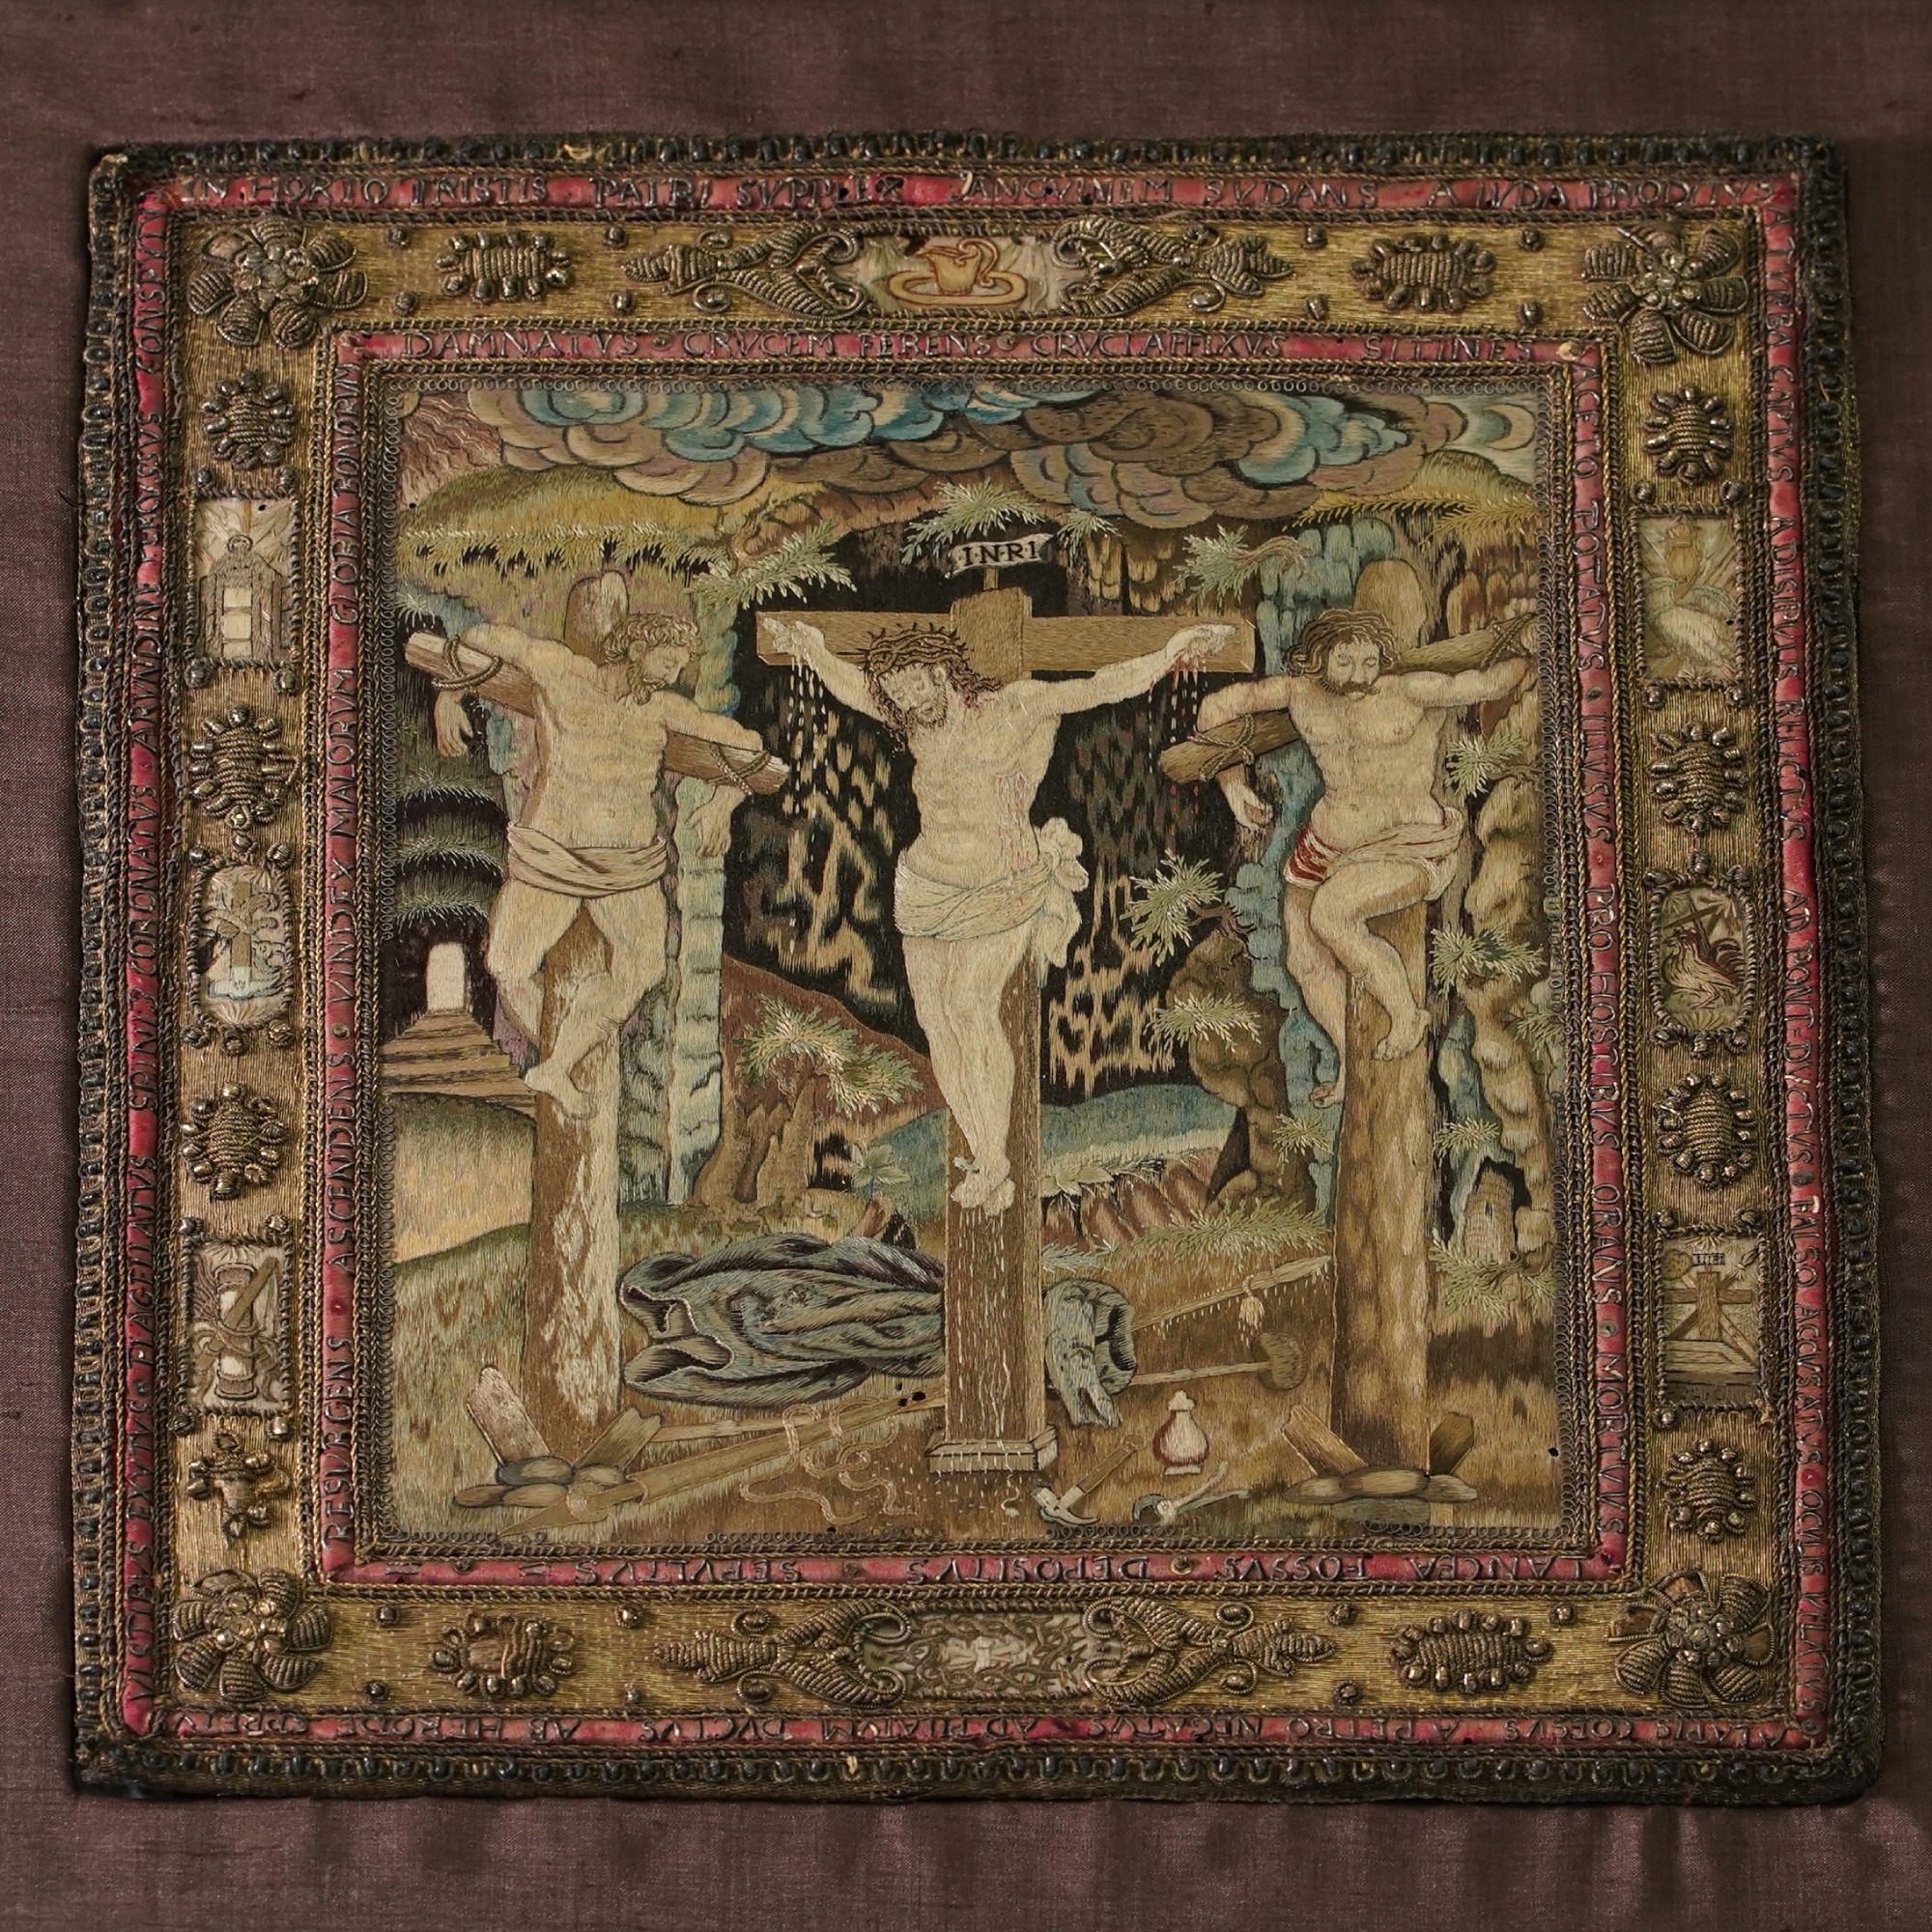 Embroidery created entirely in coloured silks. It shows Christ crucified on Golgotha, with the two thieves either side of him. Above is a dramatic sky; below are his discarded clothes, and the tools used to torture him.